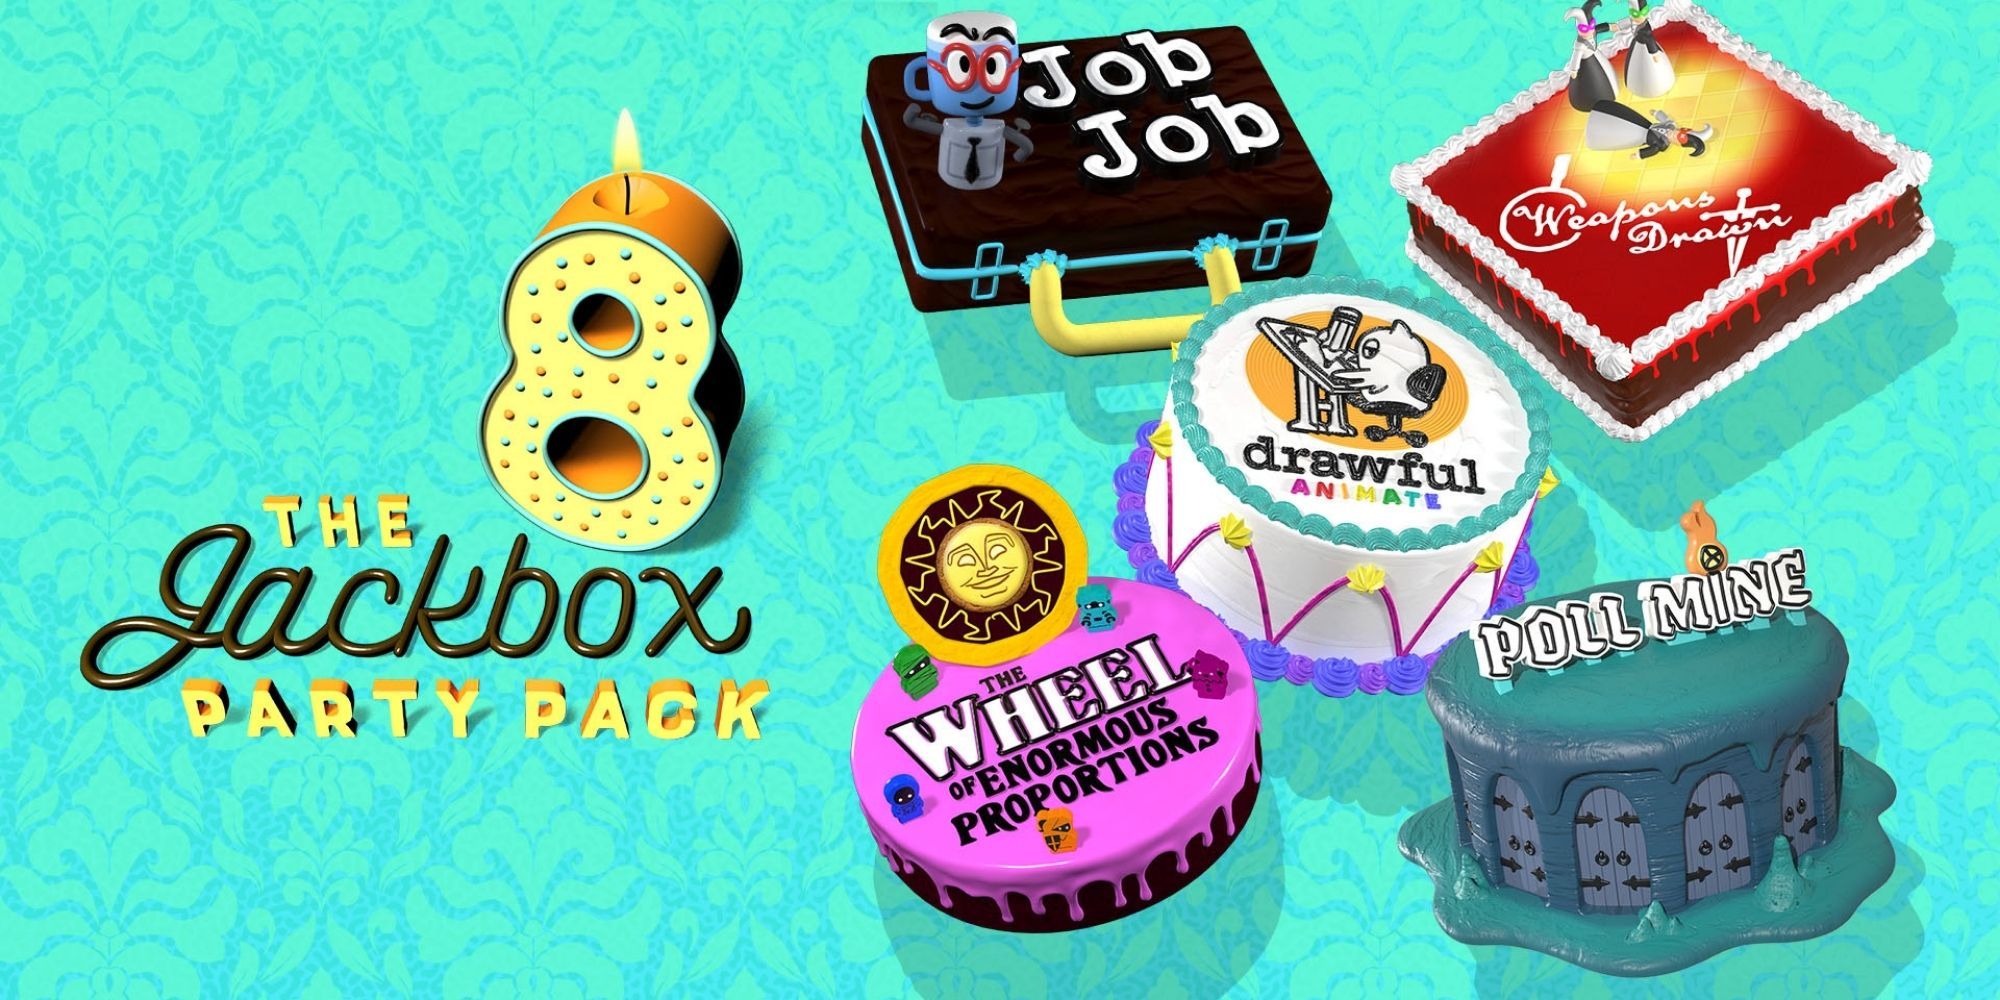 Jackbox Party Pack 8 - Job Job - Weapons Drawn - Drawful Animate - Poll Mine - The Wheel Of Enormous Proportions